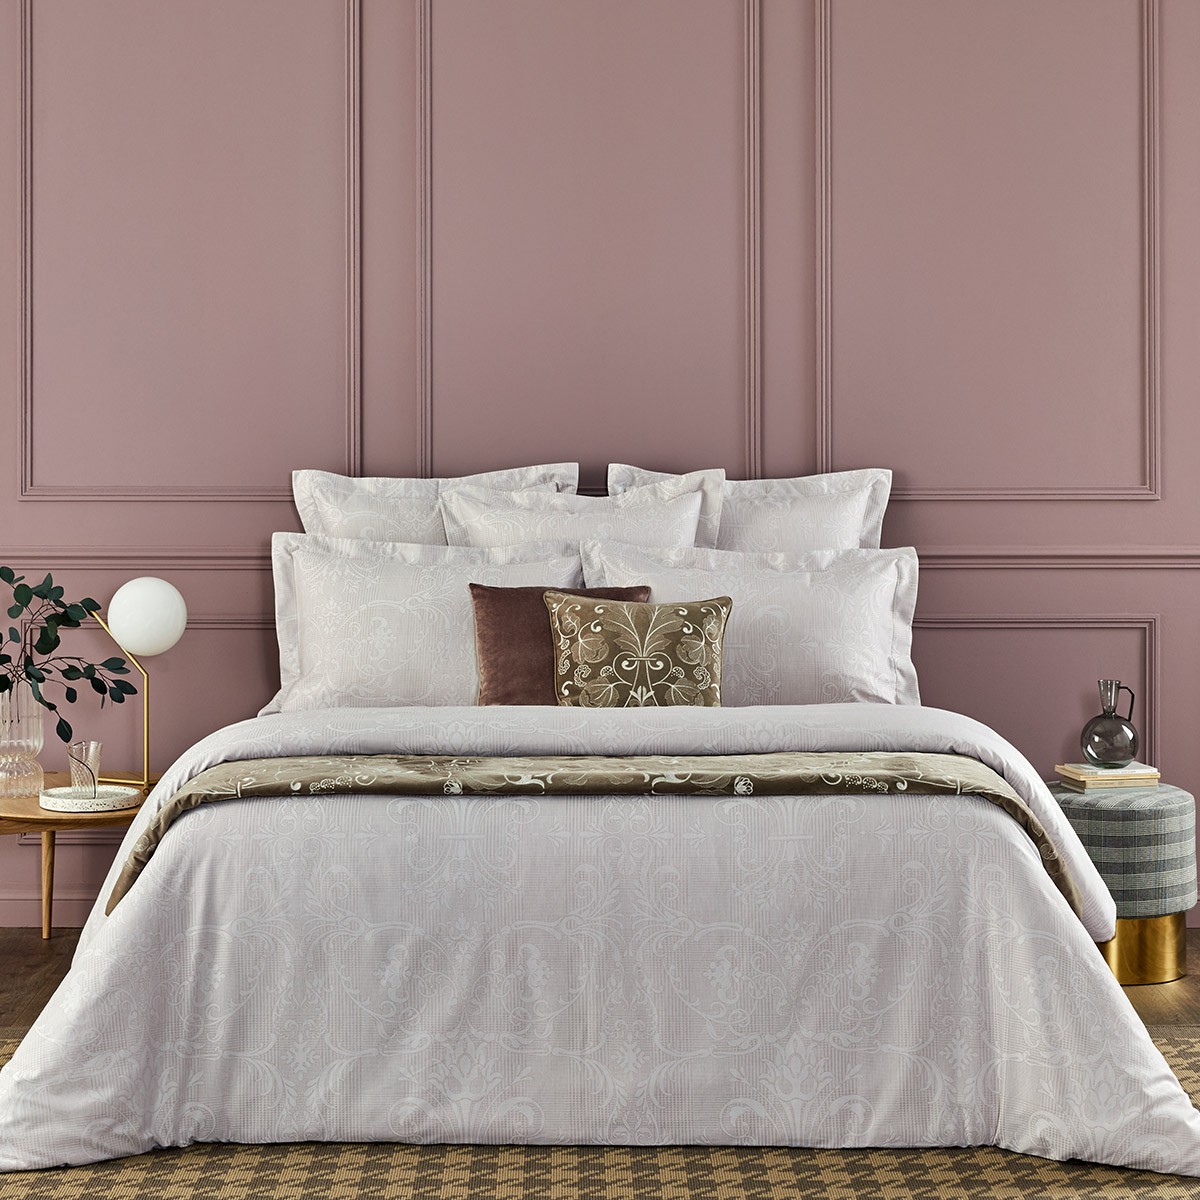 Yves Delorme Tenue Chic Bed Collection - For Her - Yves Delorme Outlet